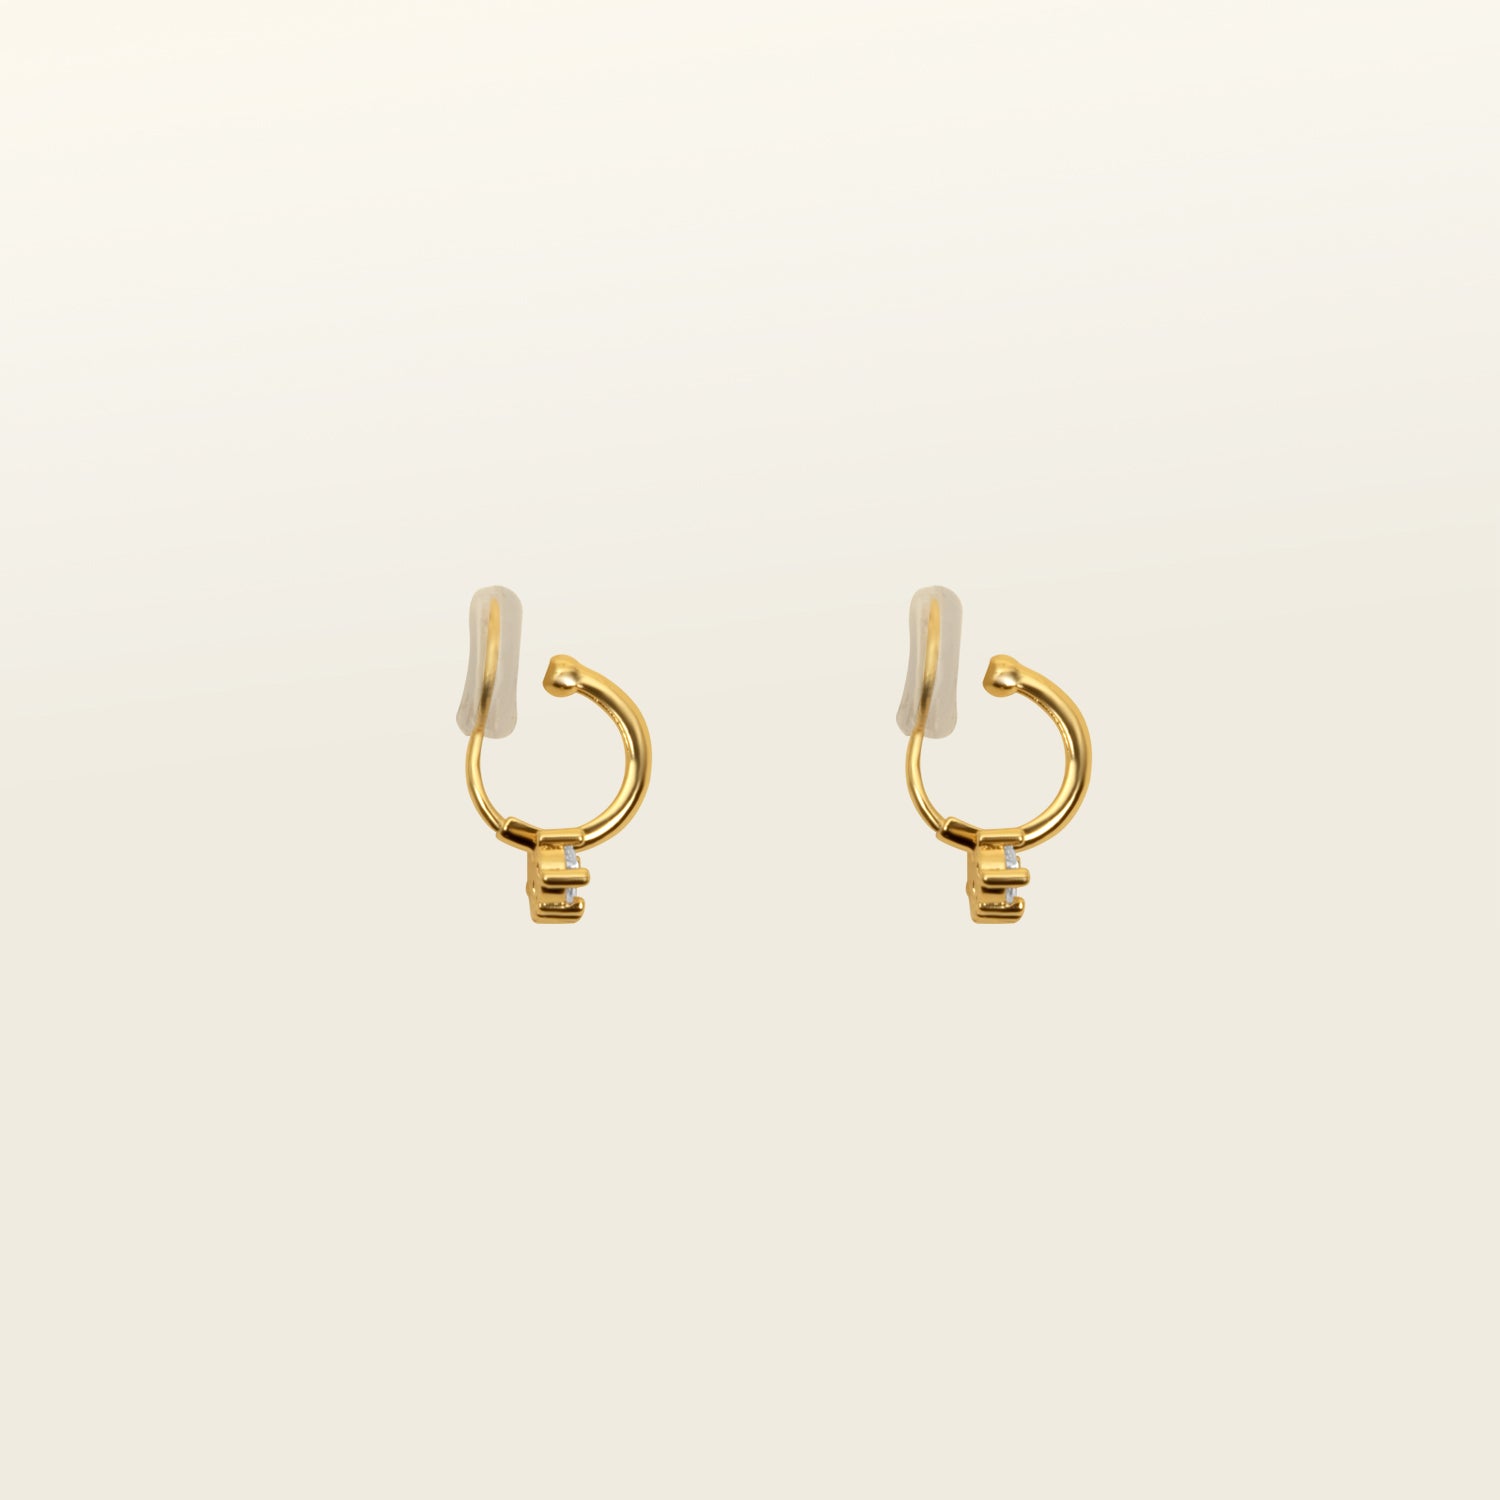 Image of the Juliette Clip-On Earrings offer a medium-strength, secure hold that lasts 24 hours. Easily adjustable with a gentle squeeze, these Mosquito Coil Clip-Ons are ideal for thick/large ears as well as sensitive ears. Crafted with gold-tone plated metal alloy and cubic zirconia, this item is sold as a single pair.